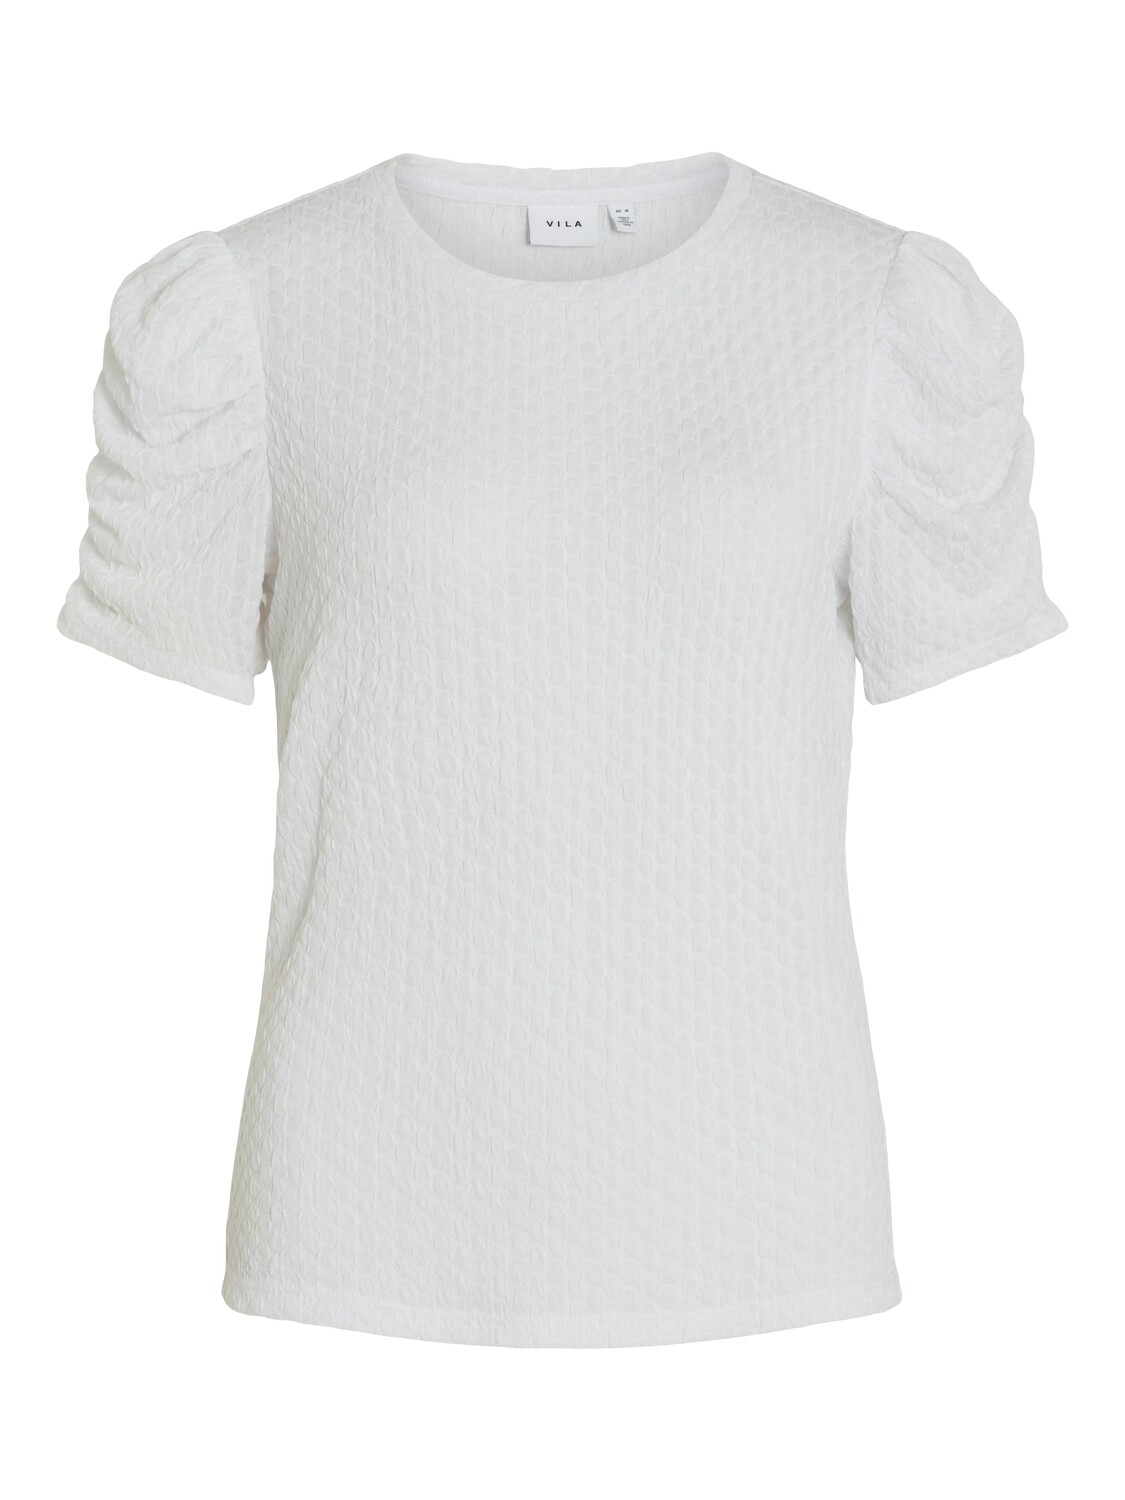 VIANINE S/S PUFF SLEEVE TOP - NOOS Bright White